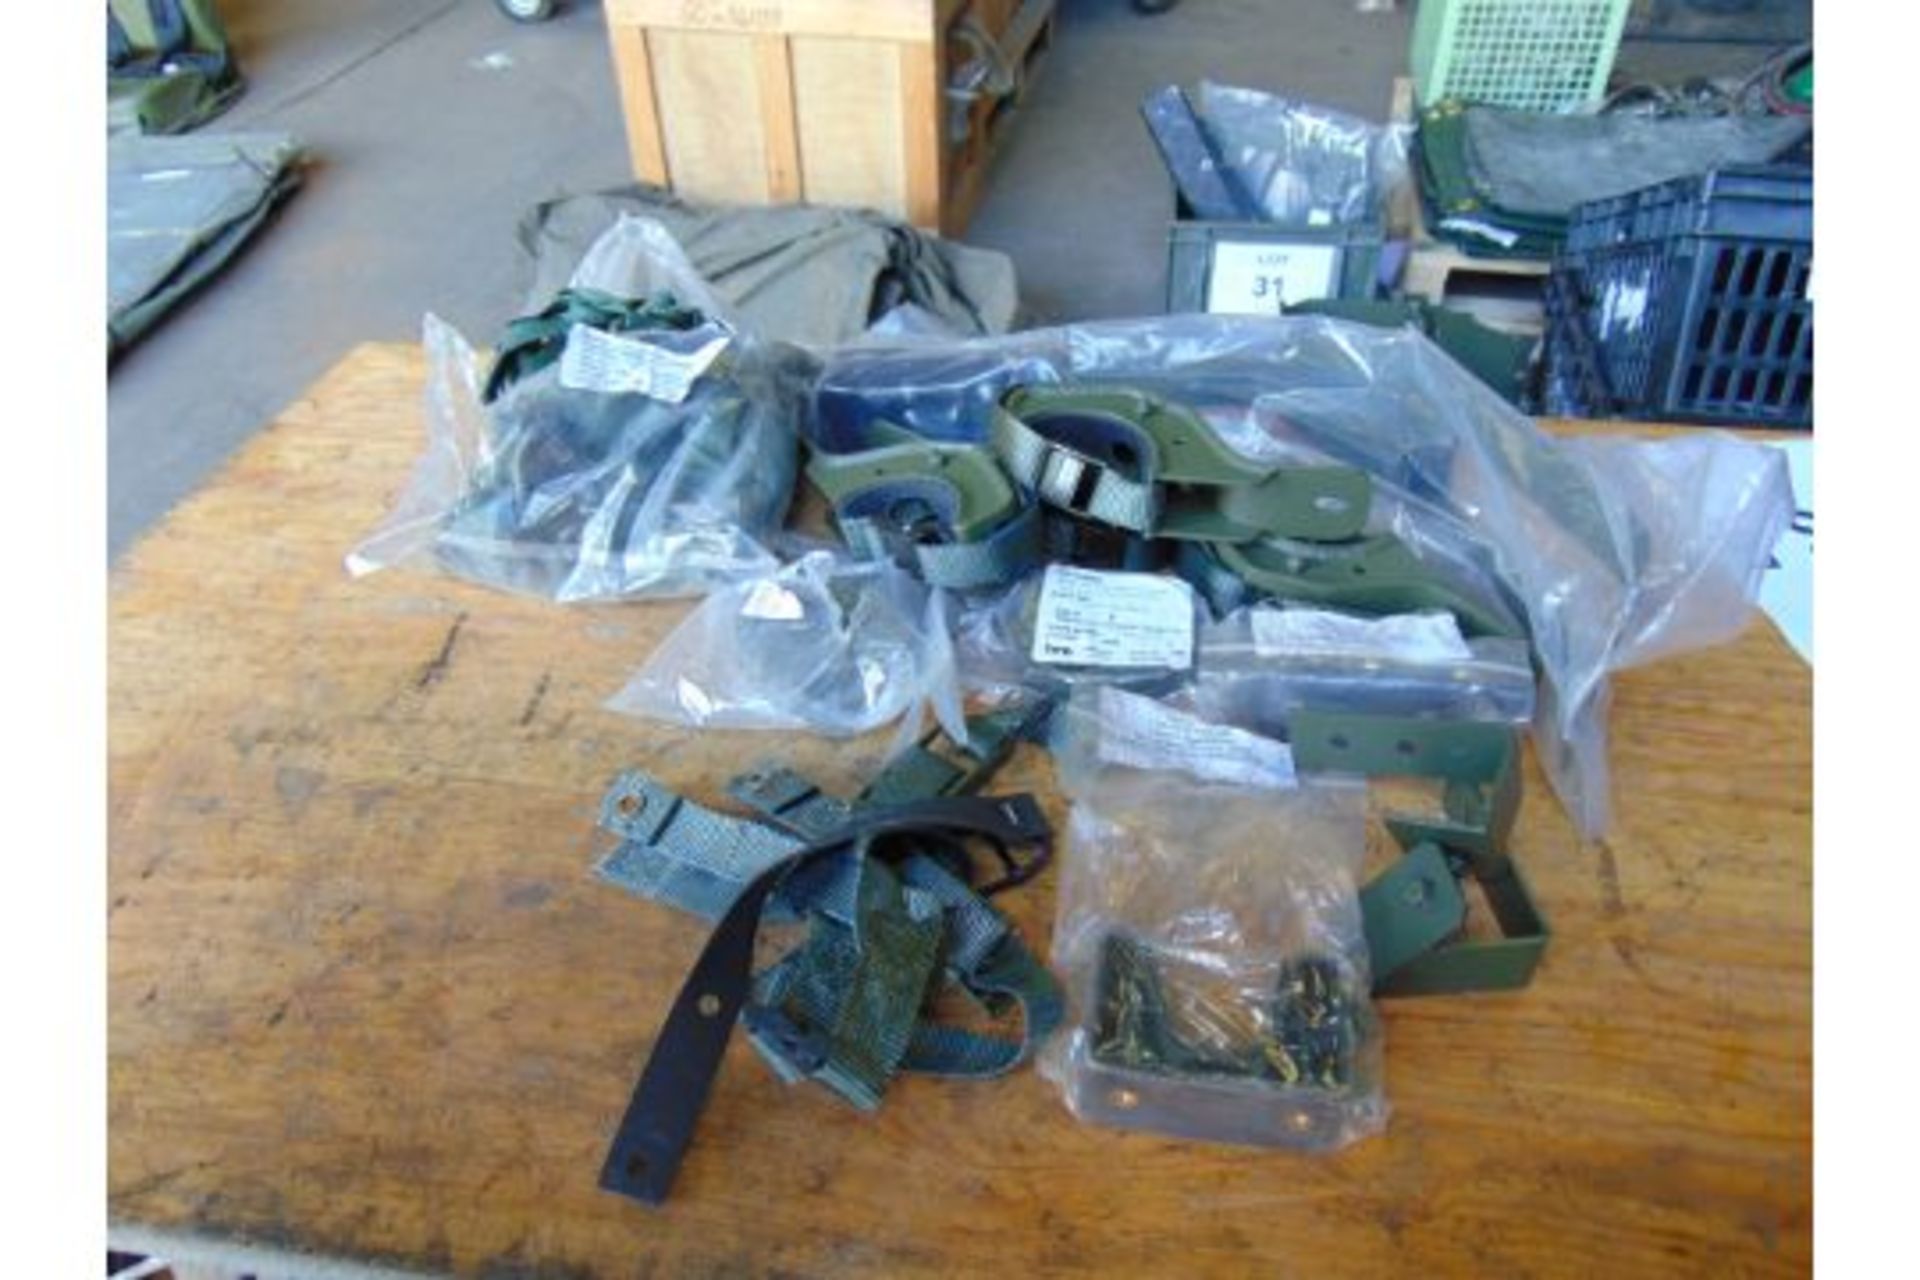 New Unissued WIMIK SA 80 Clips Launcher Covers, Stowage Straps, Barrel Clamps etc - Image 8 of 8